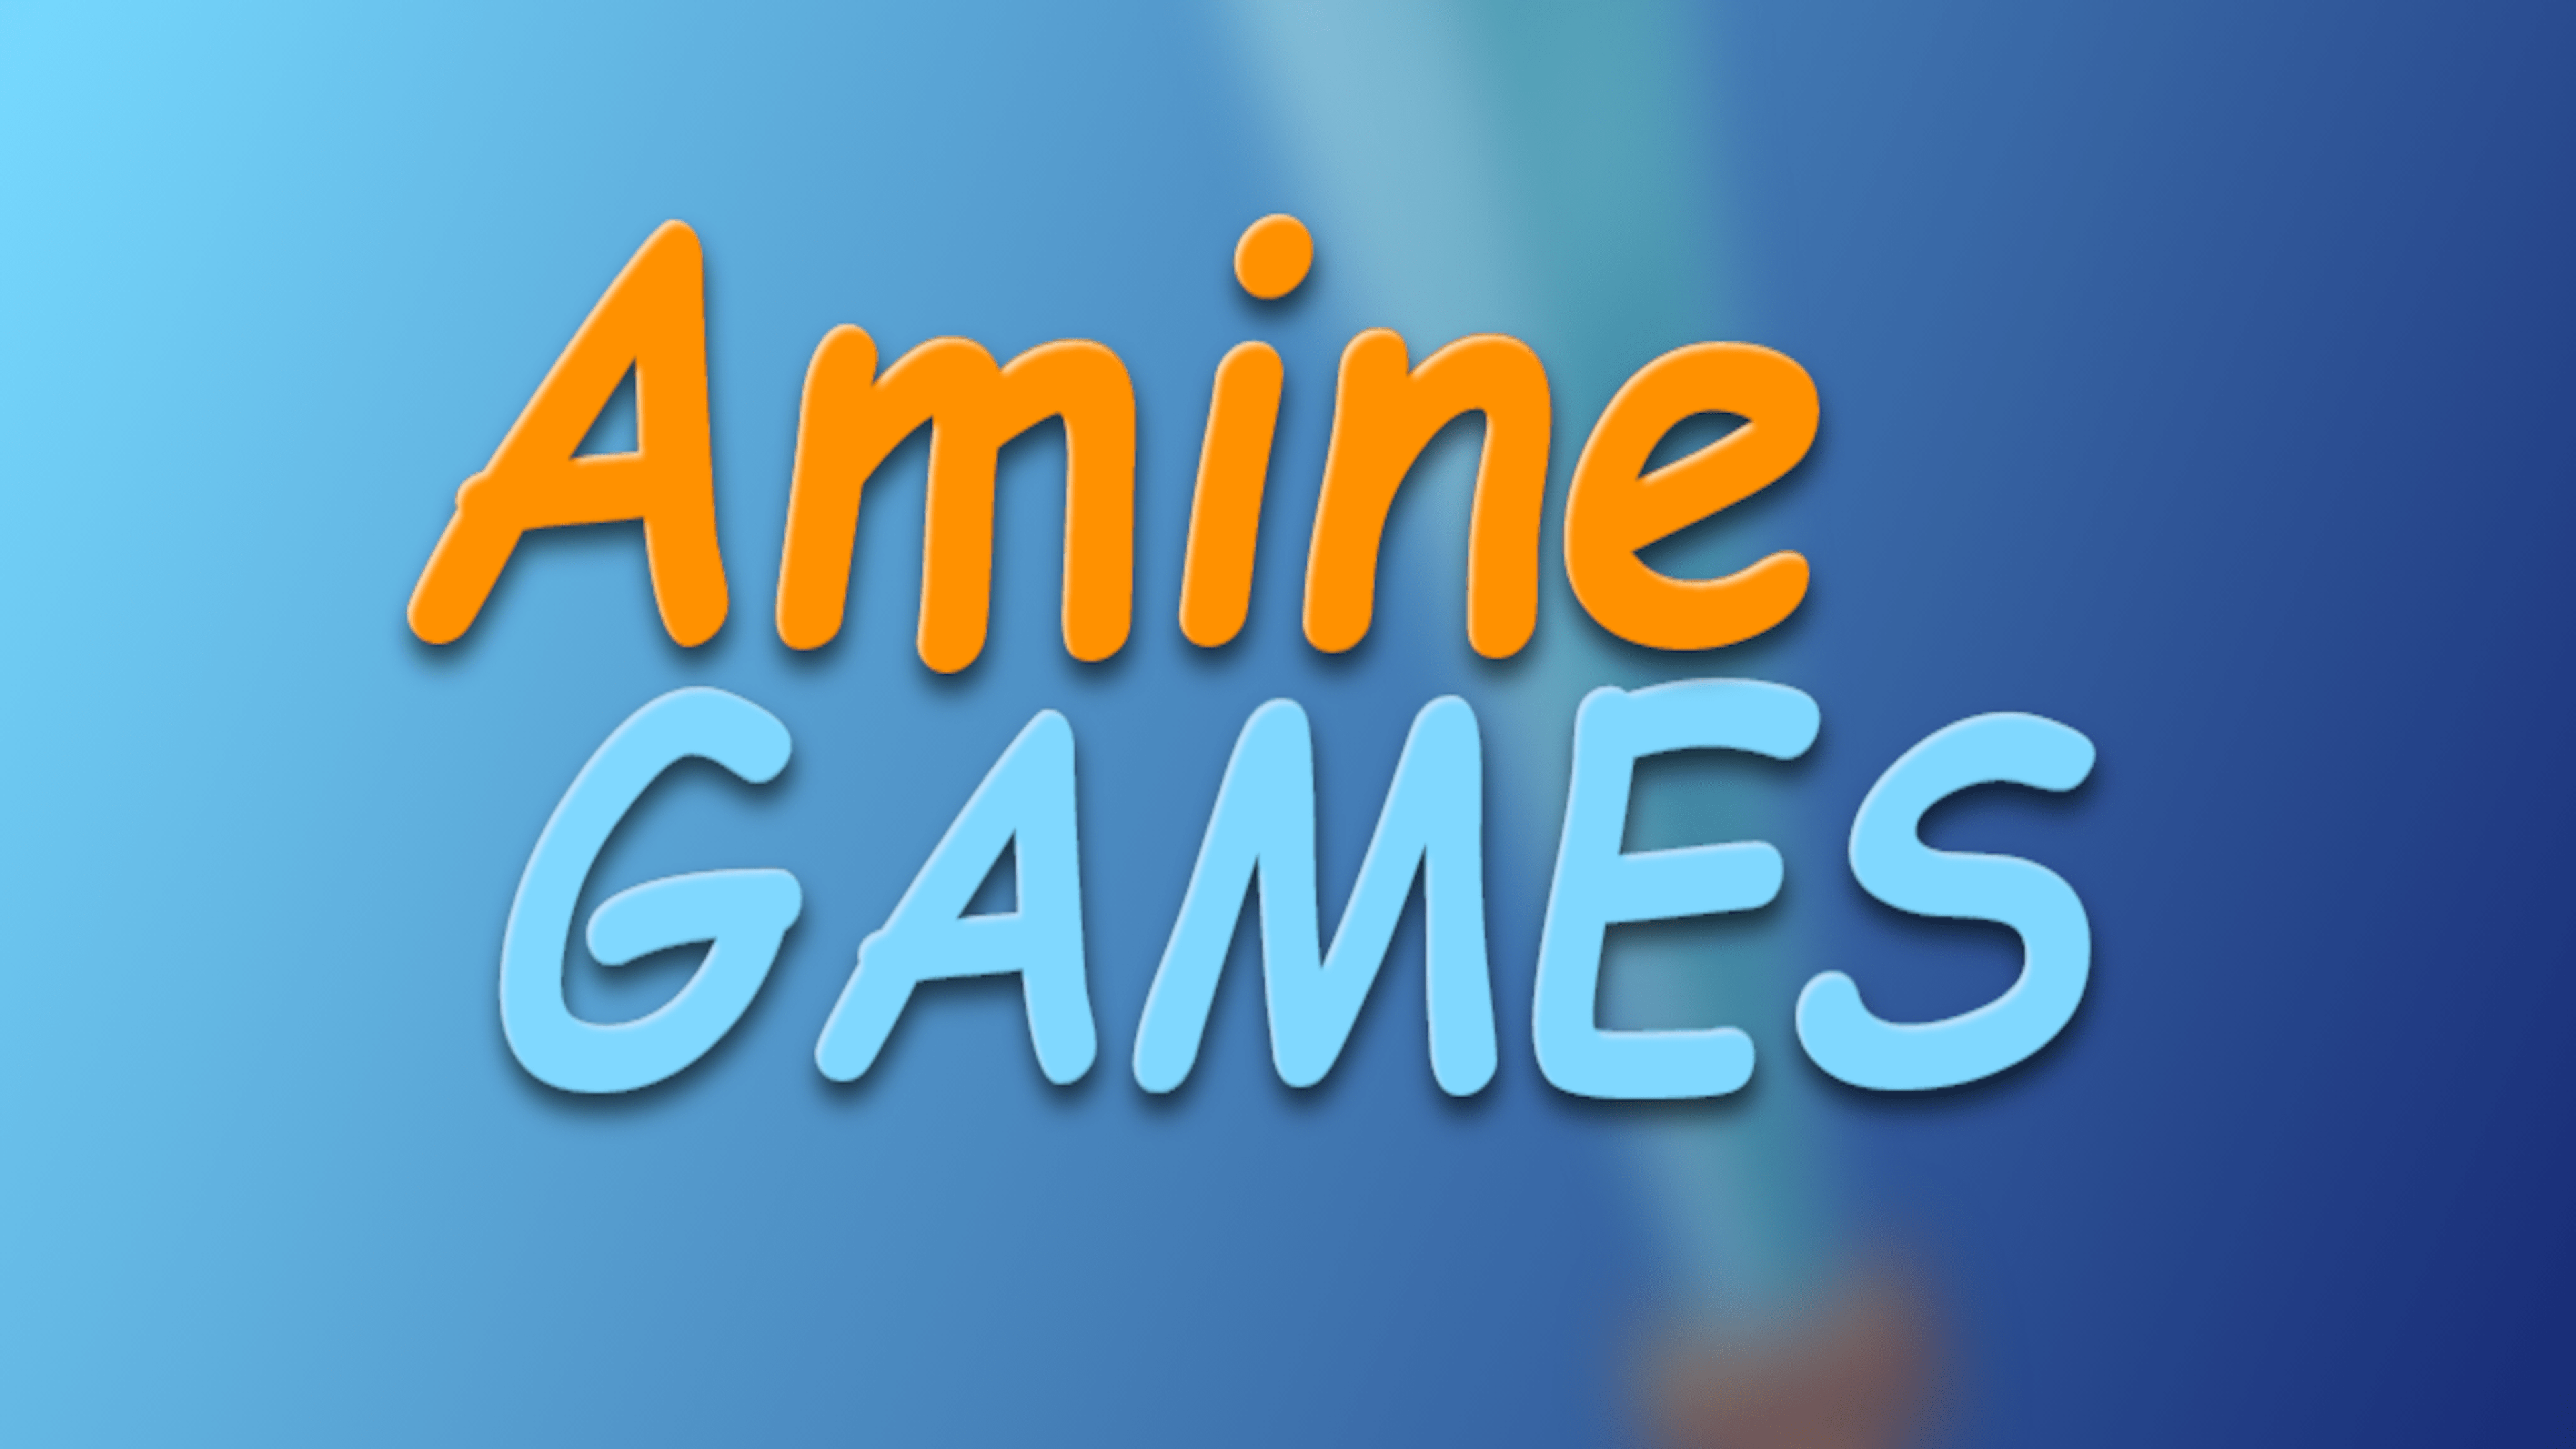 Android Apps by Amine GAMES on Google Play